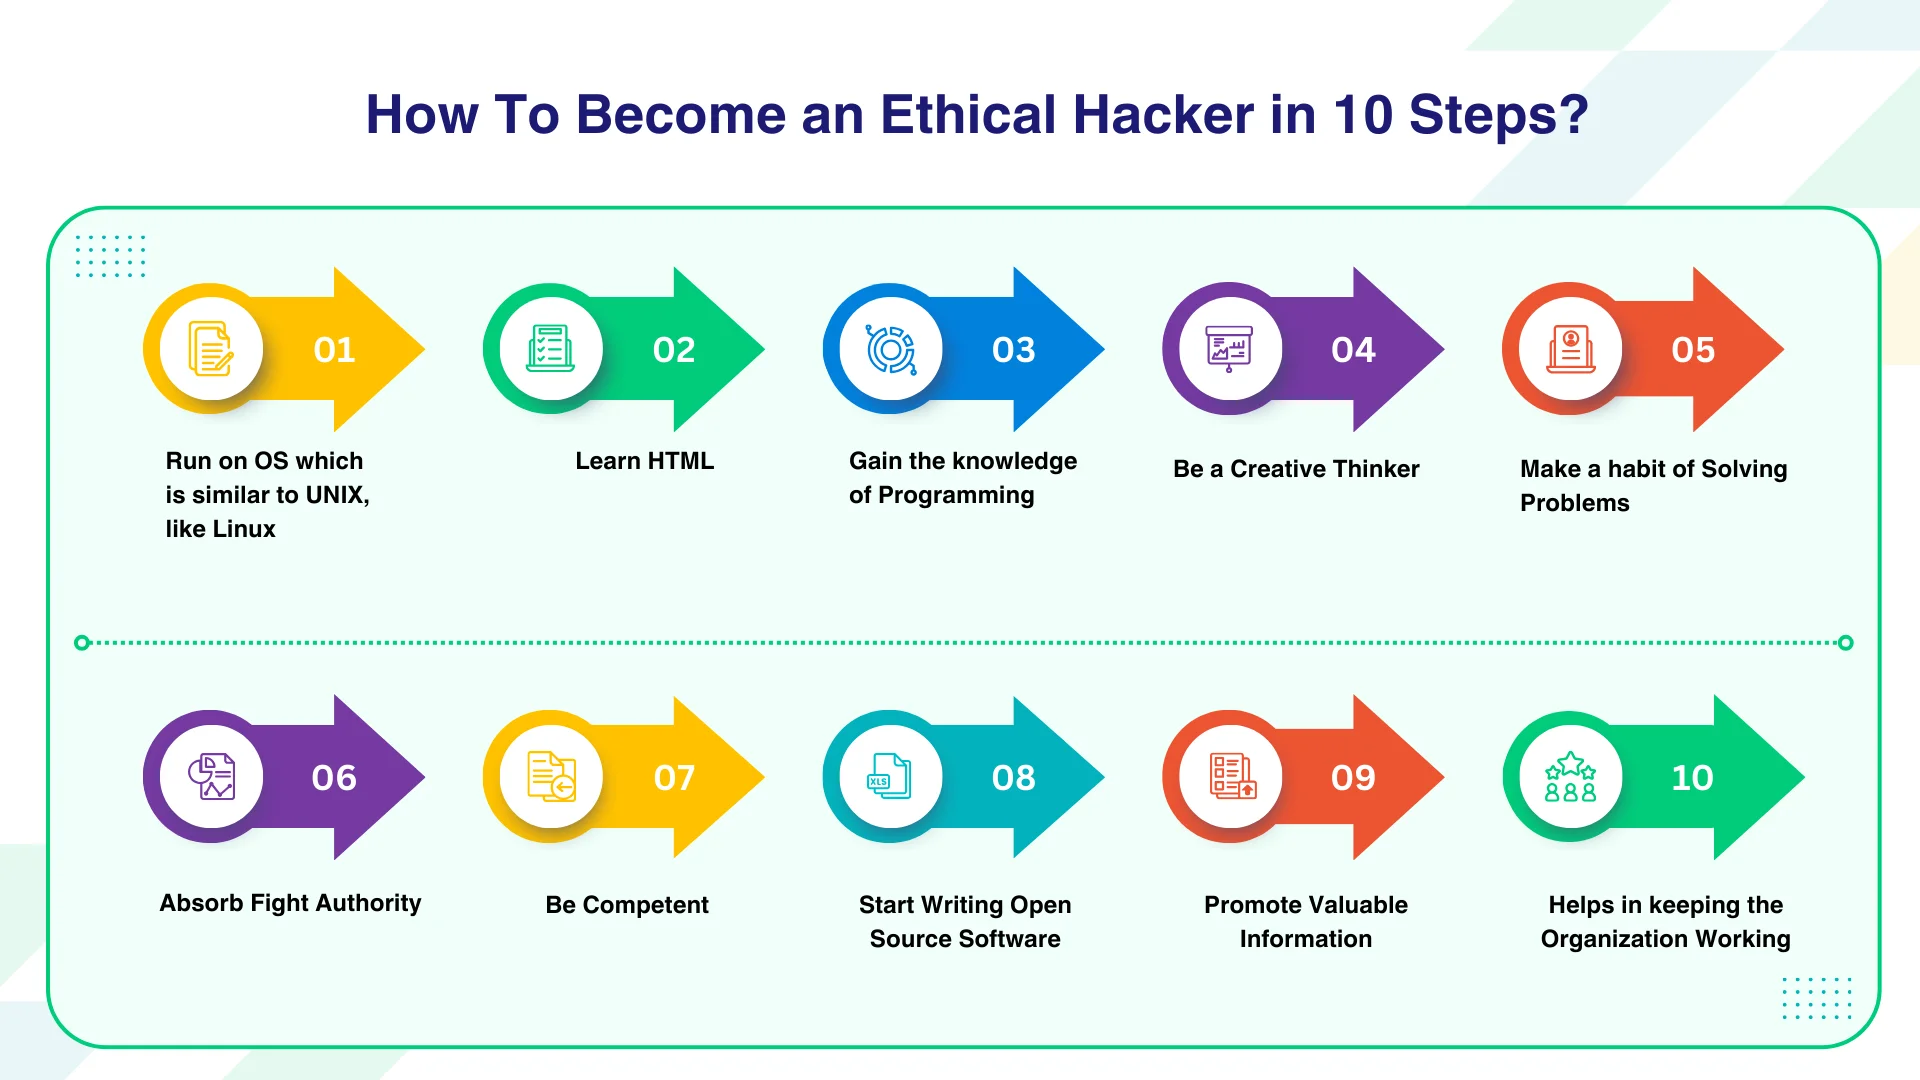 How To Become an Ethical Hacker in 10 Steps